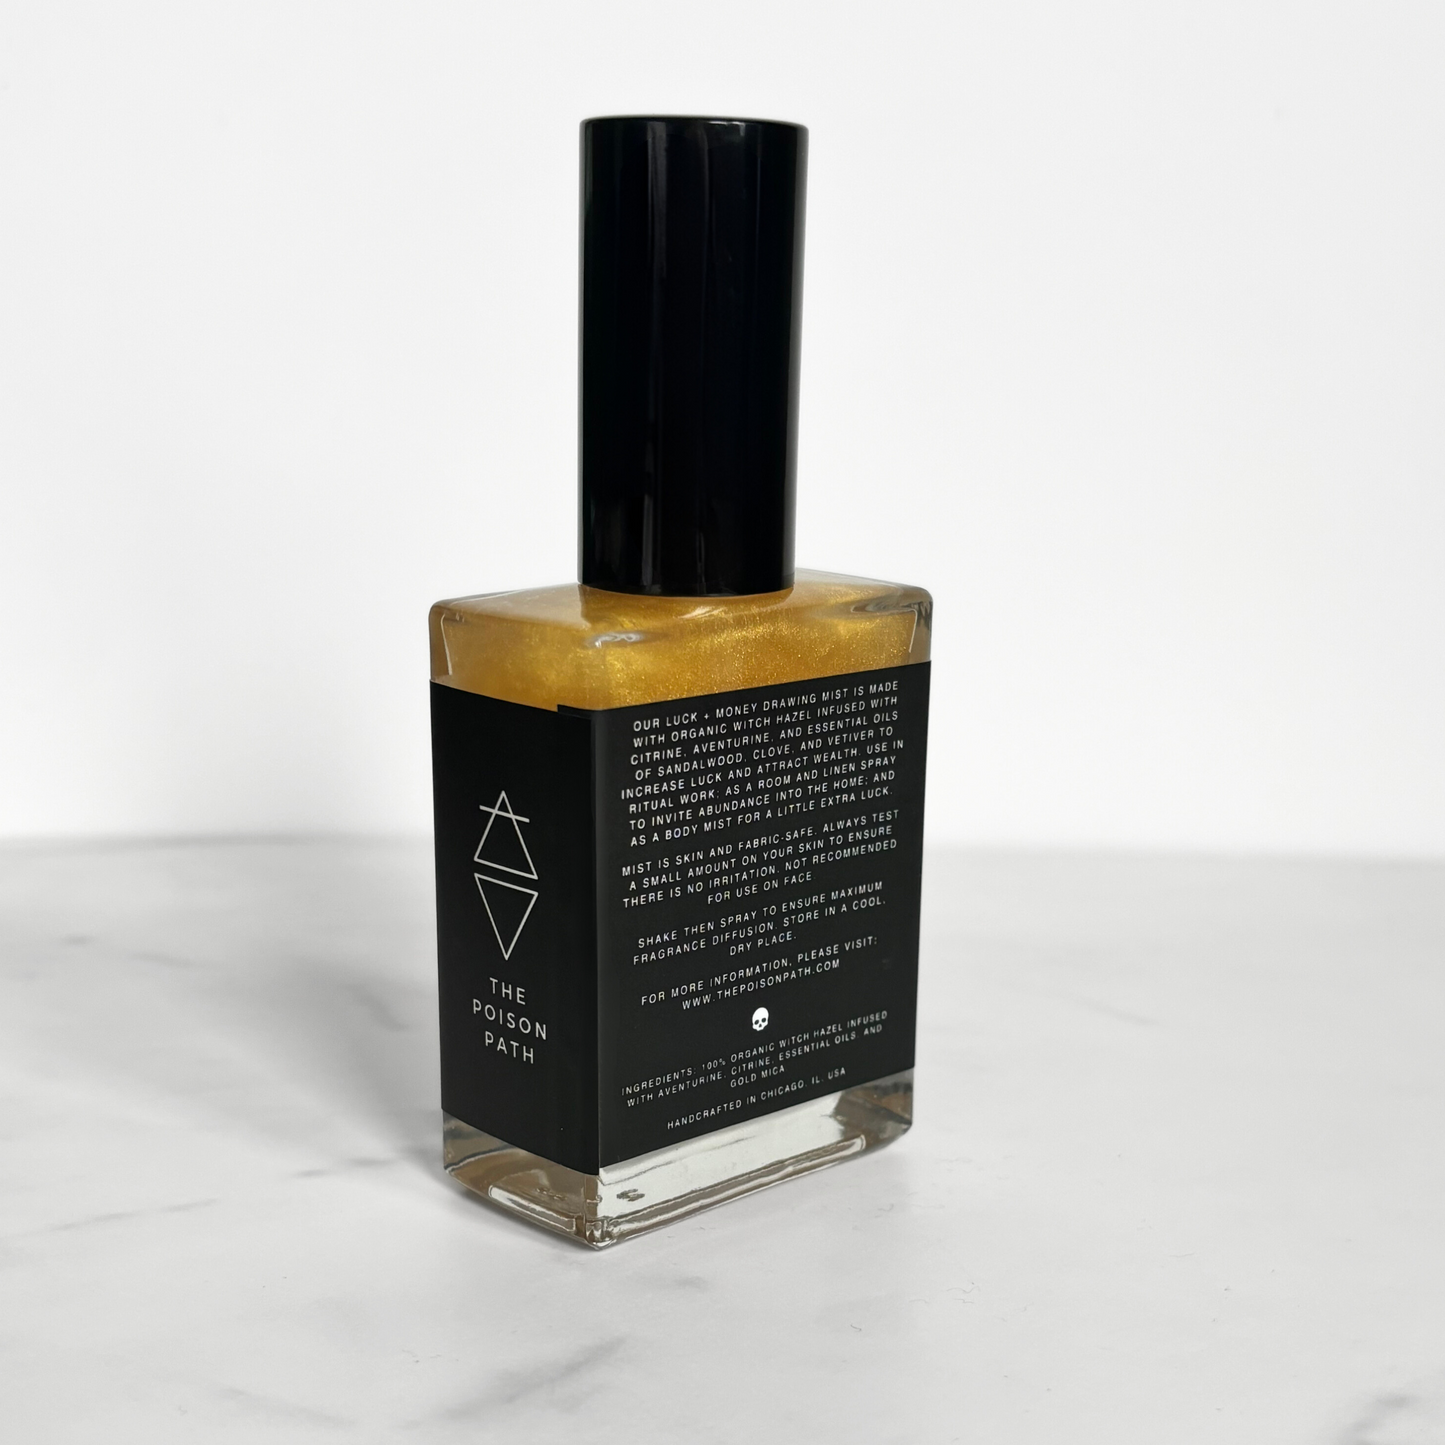 The Alchemy | Luck + Money Drawing Fragrance Mist